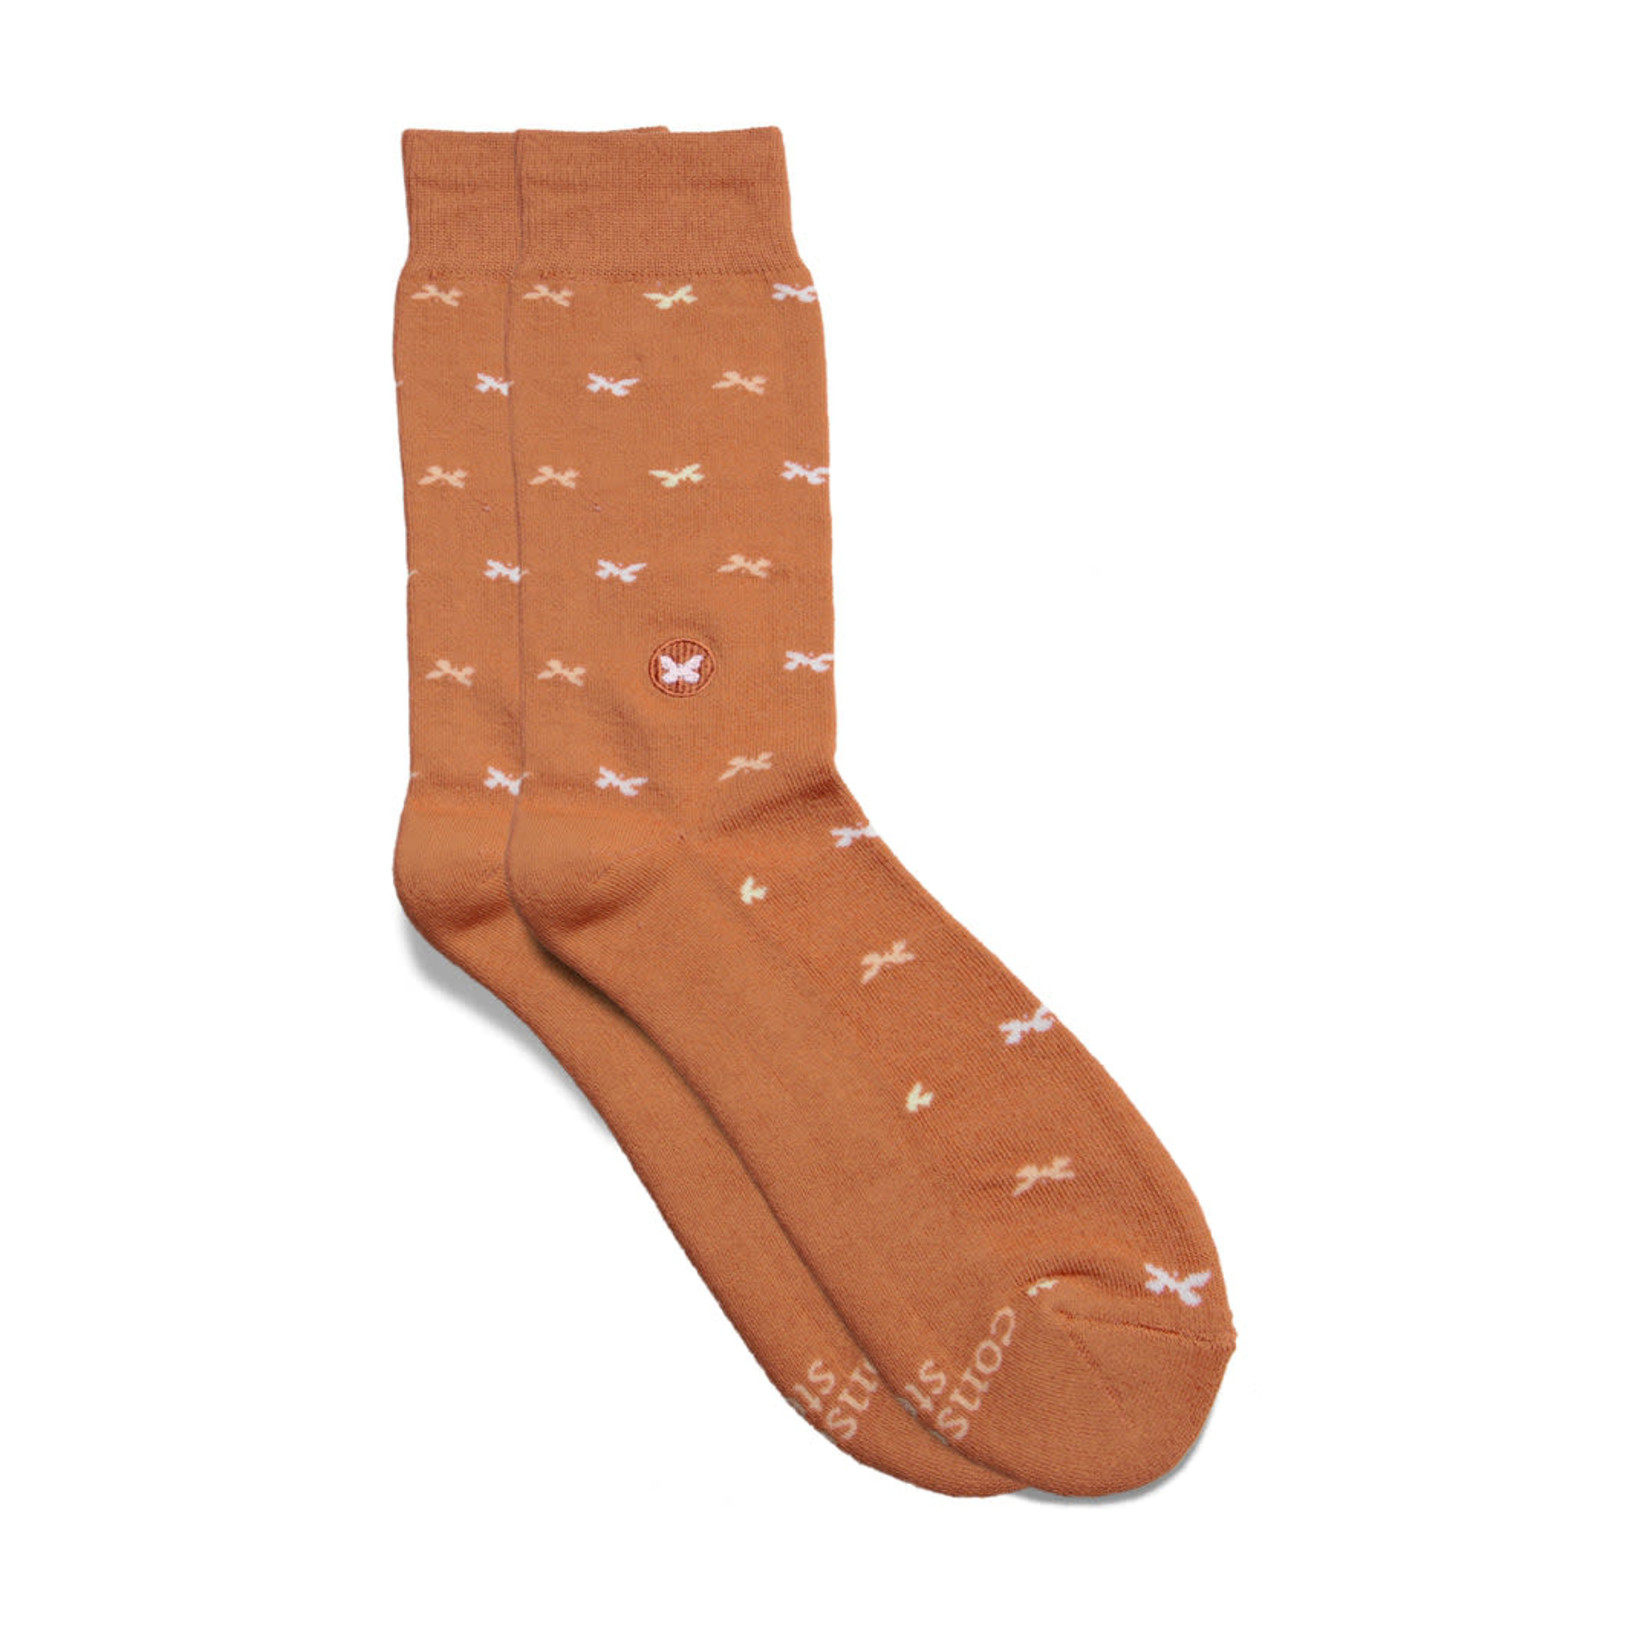 Conscious Step Conscious Step Socks that Prevent Violence Against Women, Orange, Small